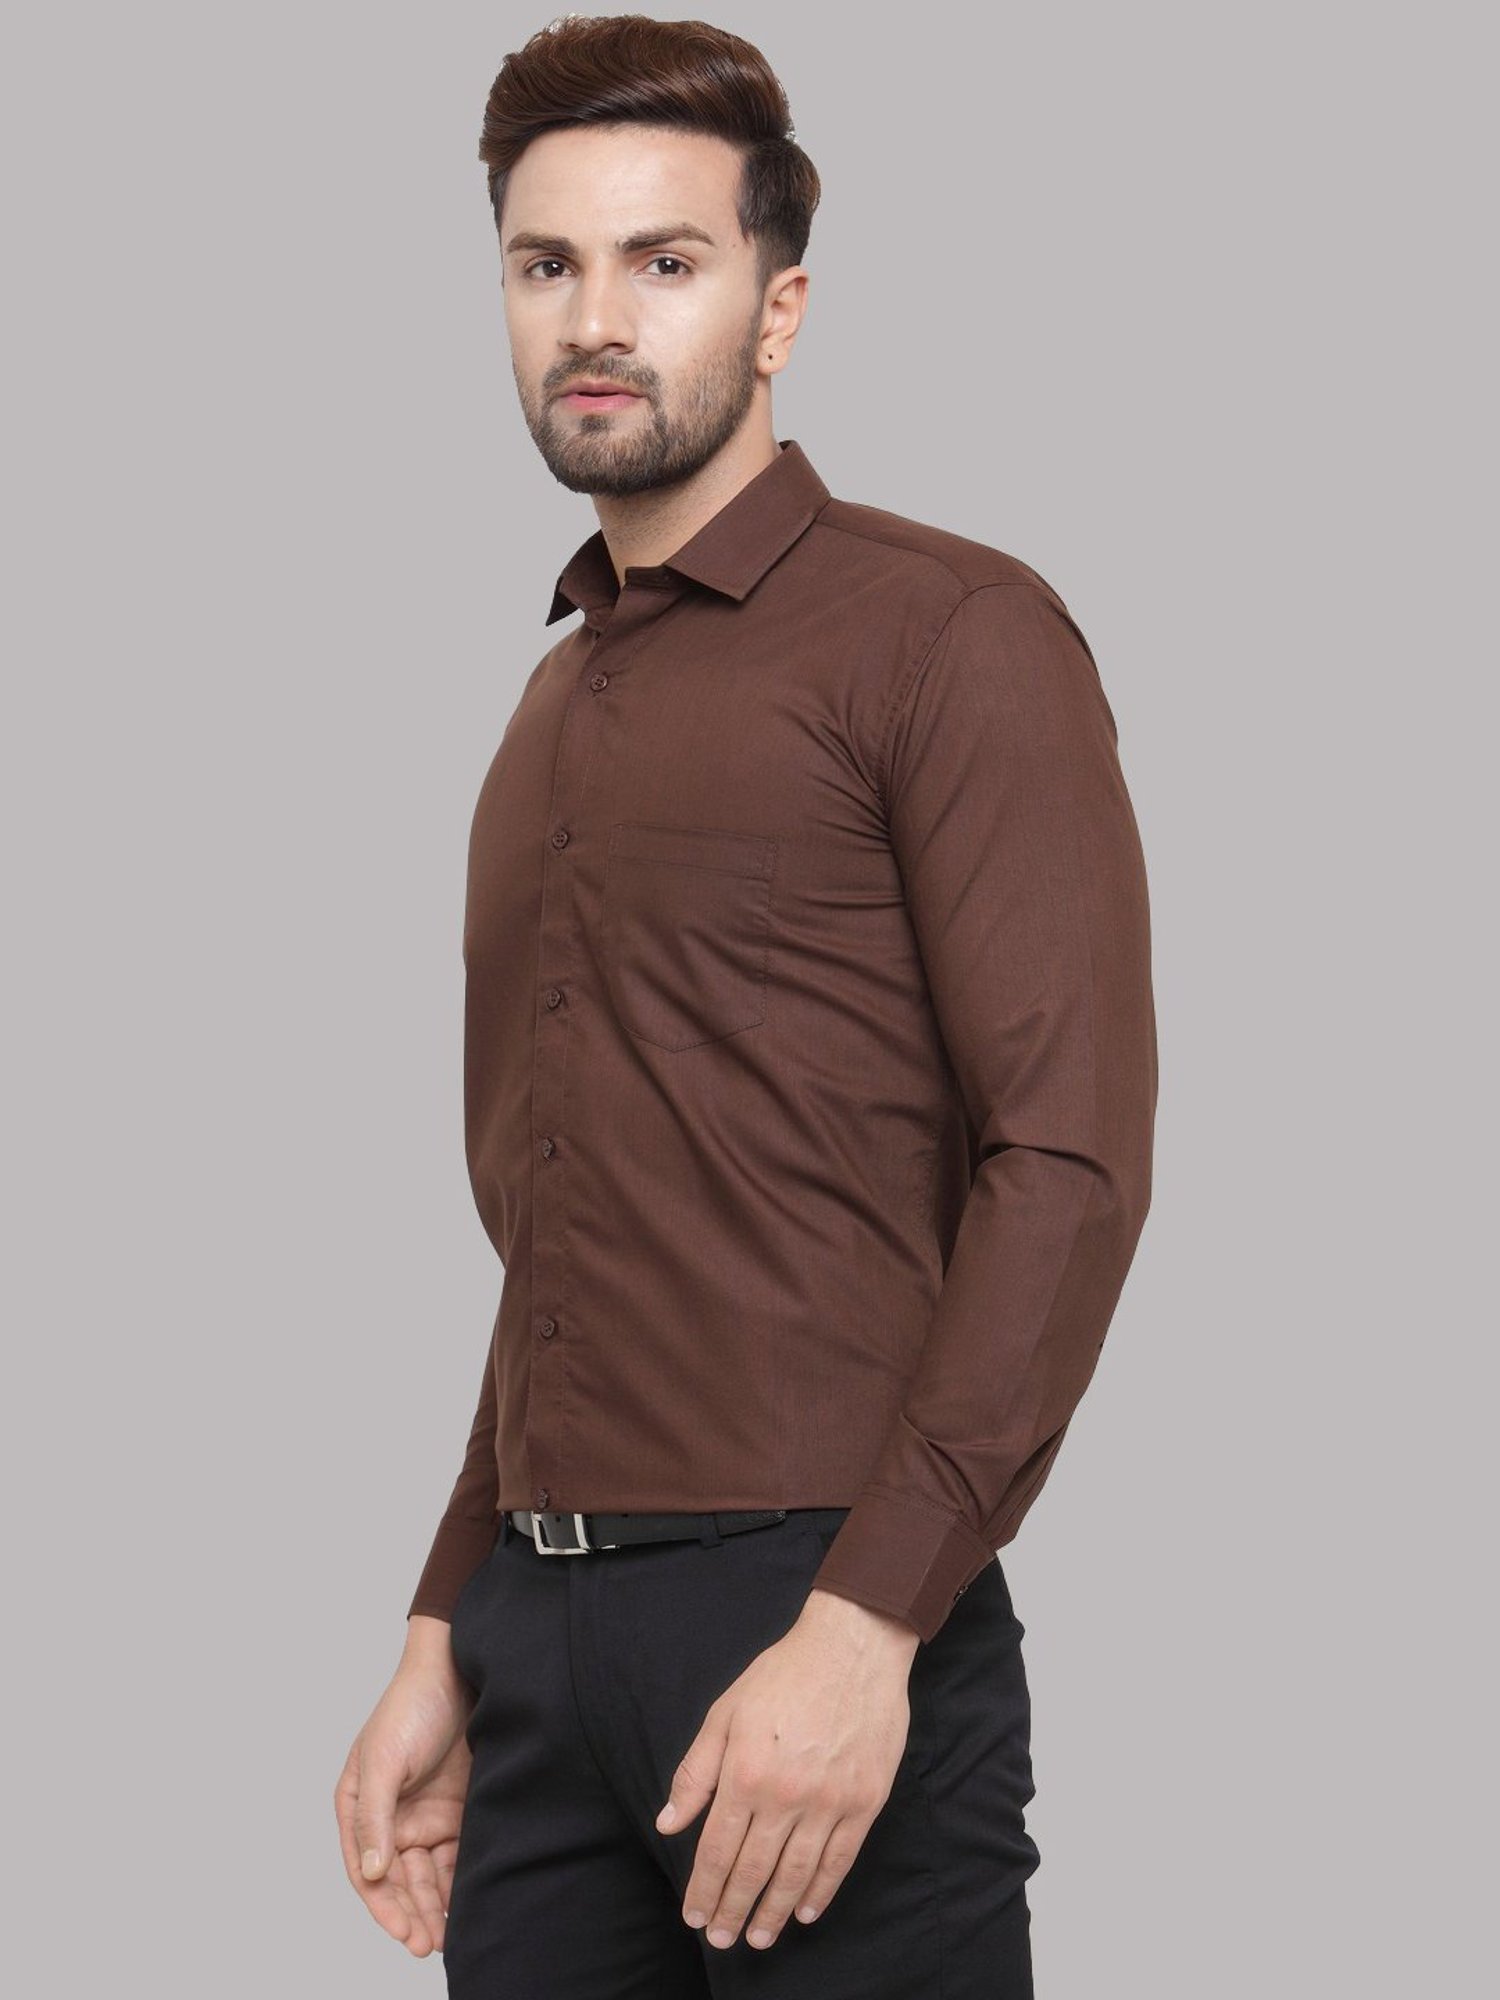 What pants go with a brown shirt? - Quora